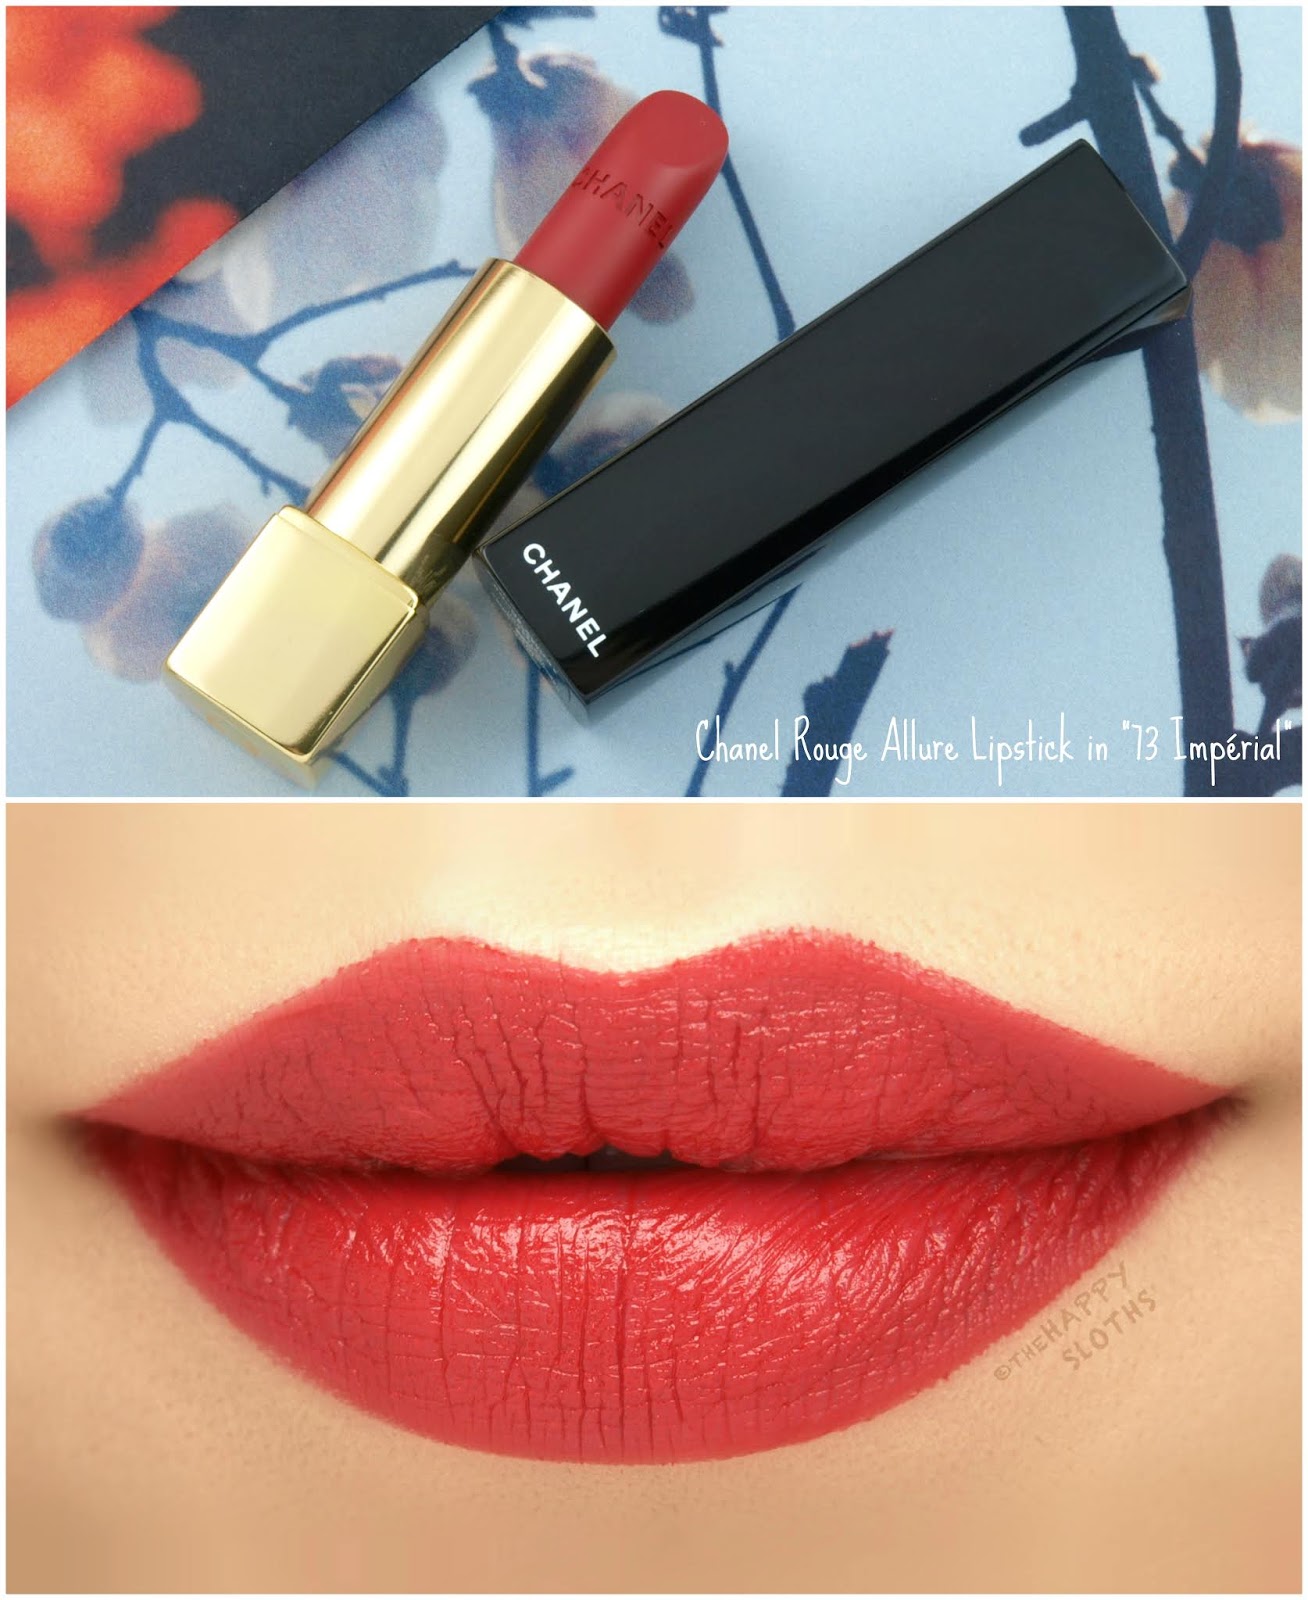 Chanel Spring-Summer 2018 | Rouge Allure Velvet Lipstick in "73 Impérial": Review and Swatches